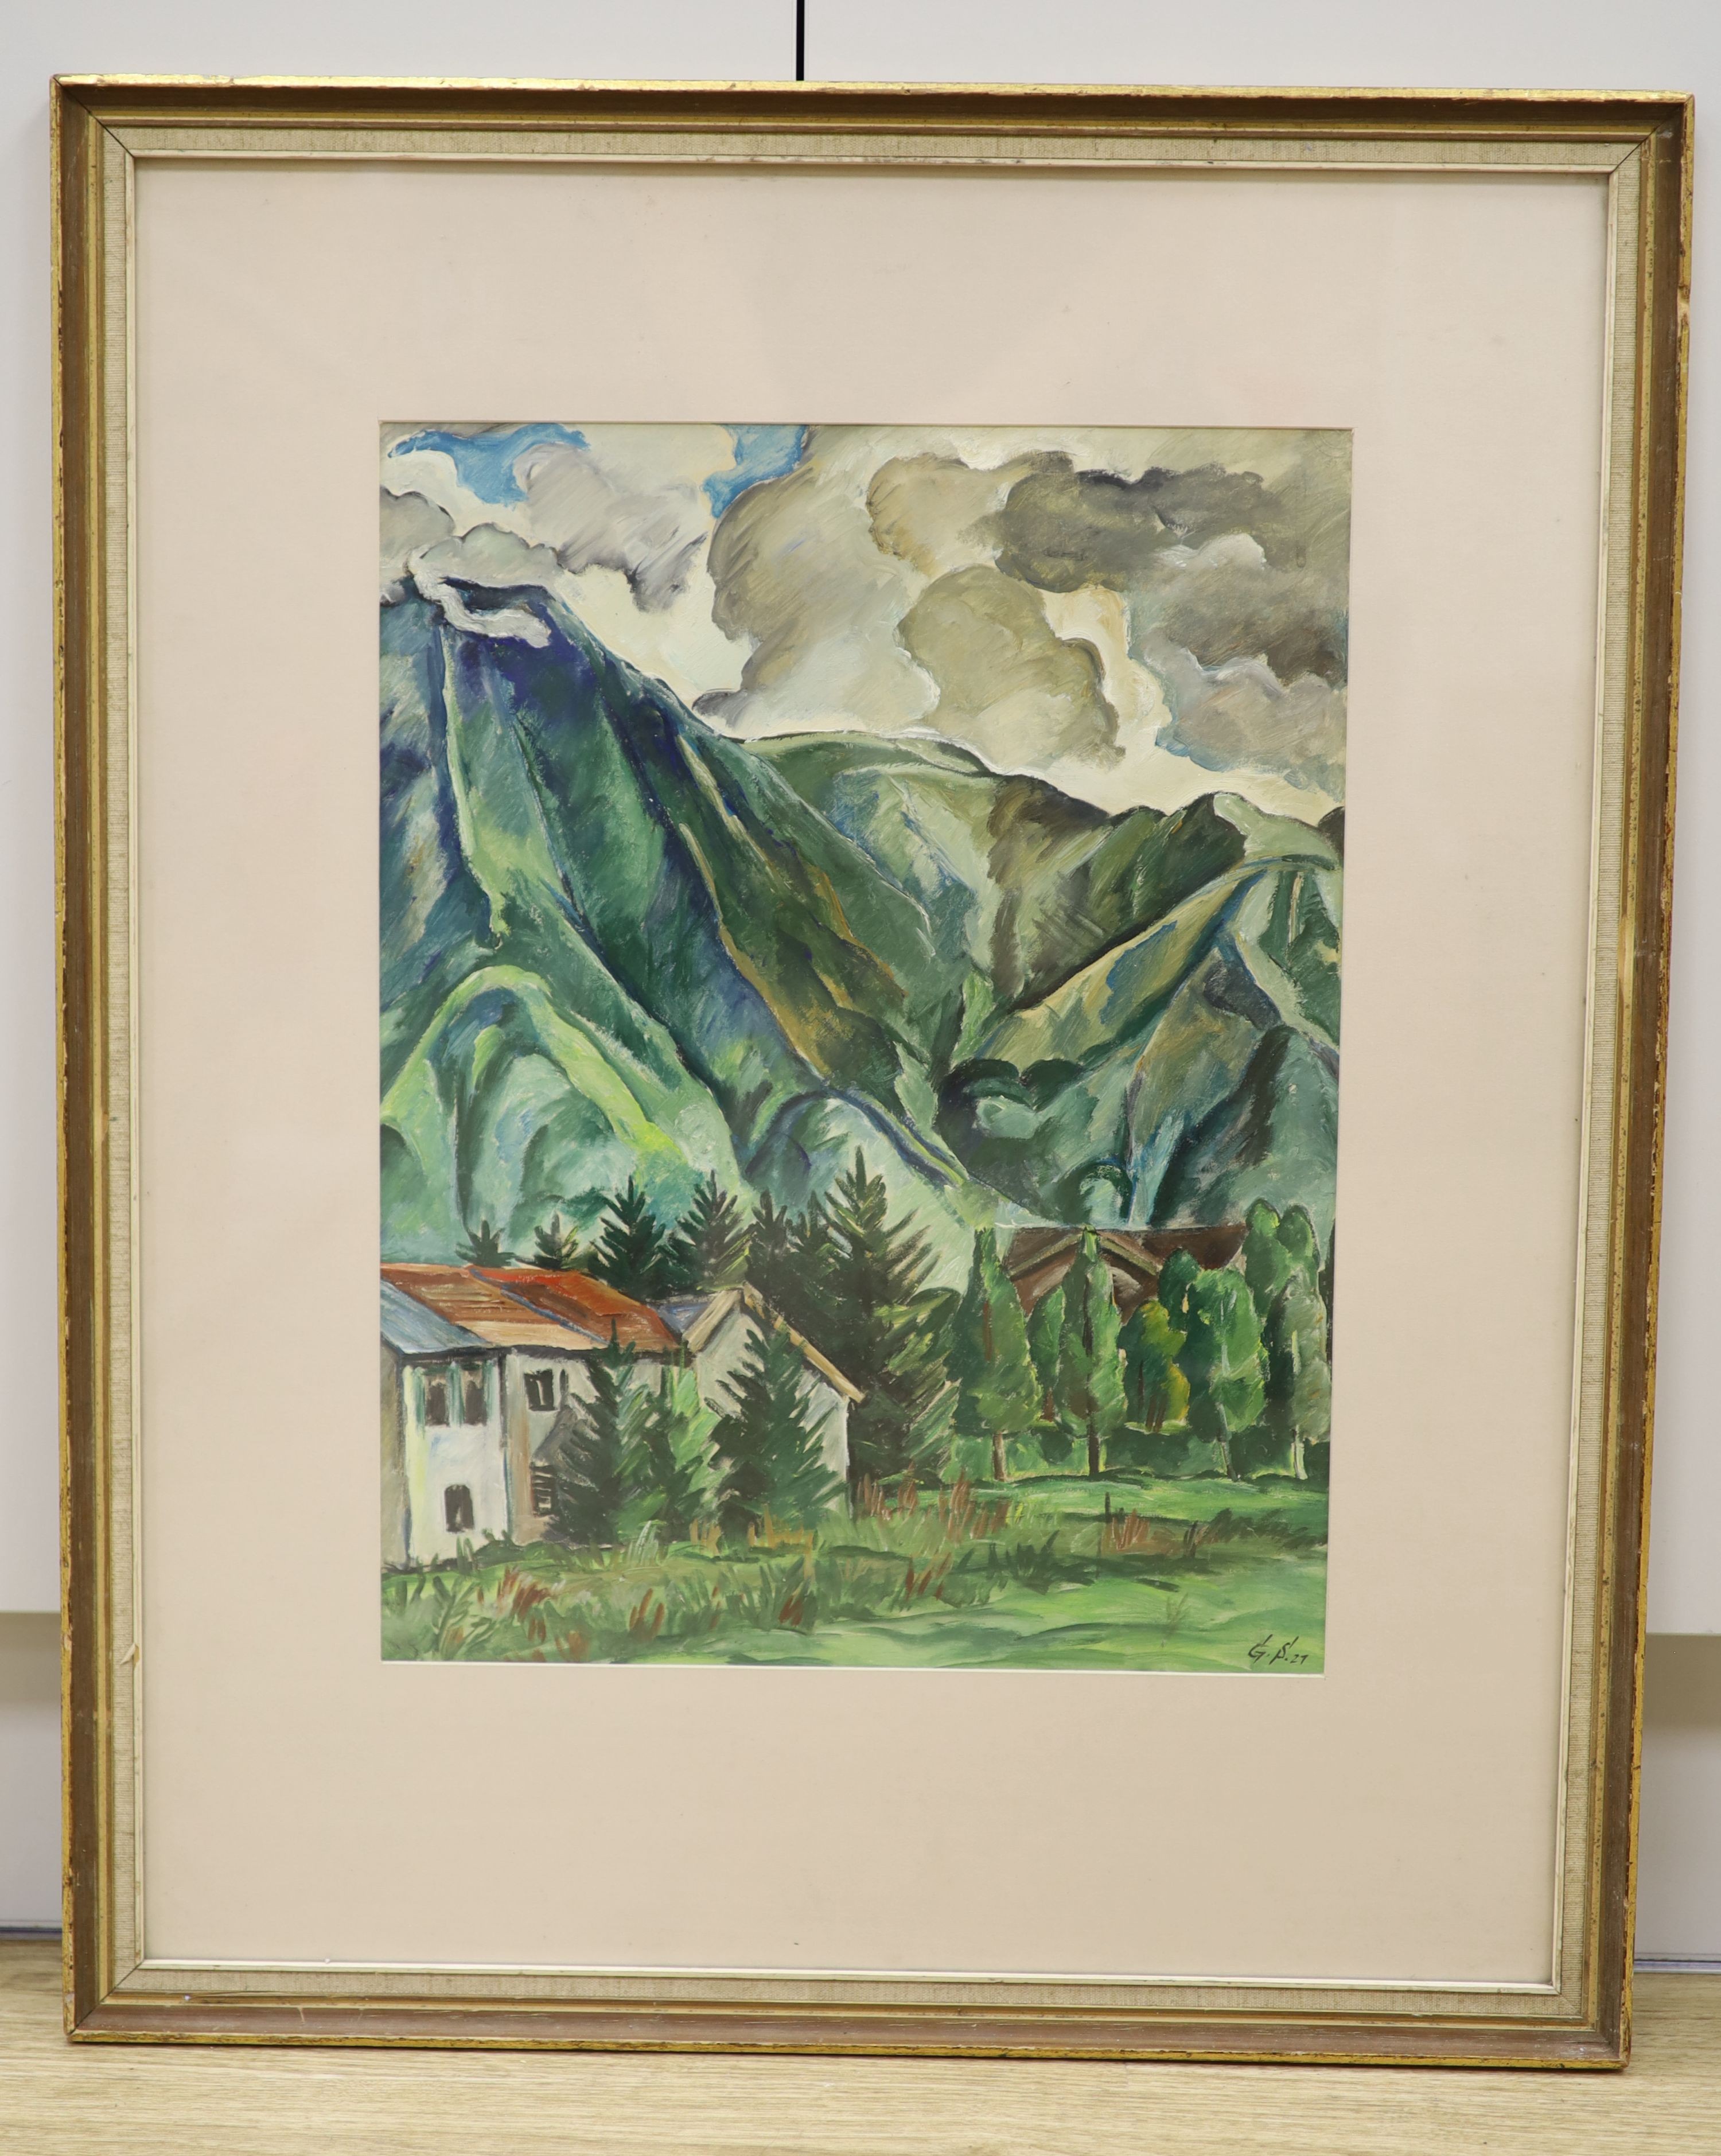 Gustau Adolf Schaffer (1881-1937), oil on paper, "Eigern 1921', initialled and dated, 46 x 36cm - Image 2 of 3